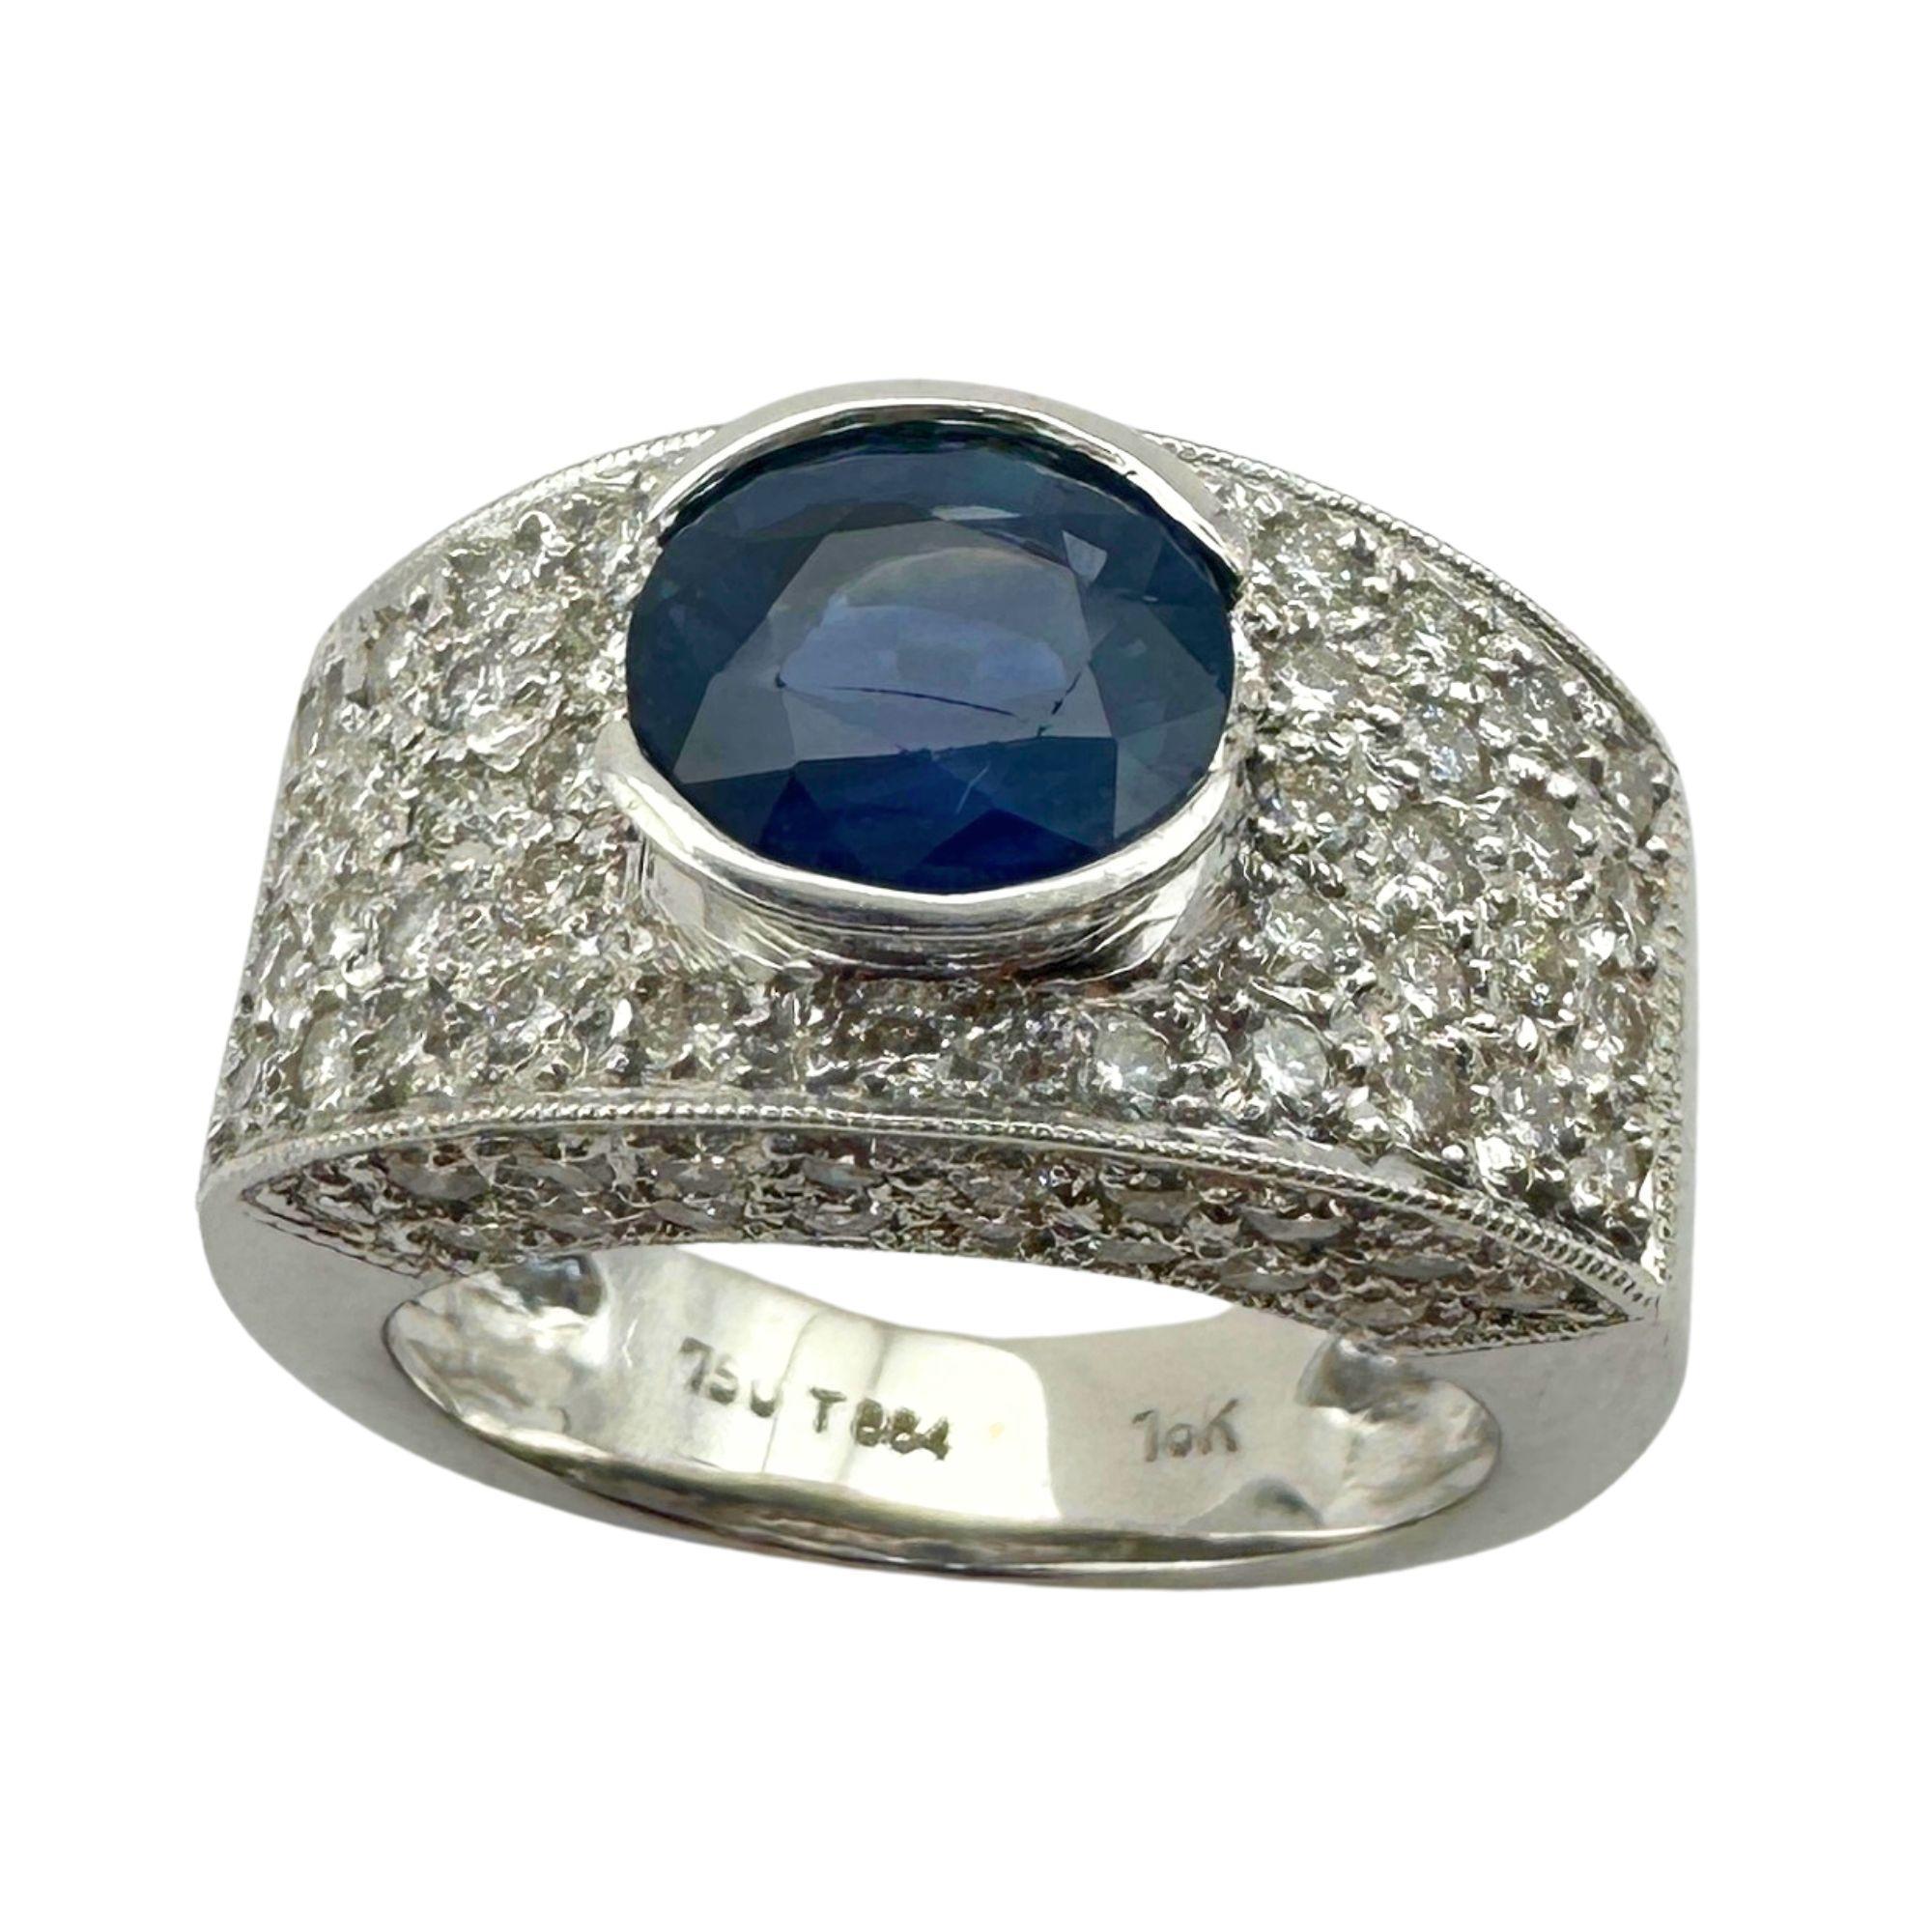 Indulge in luxury with our 18k Diamond and Sapphire Wide Band Ring. Featuring 1.40 carats of sparkling diamonds and a stunning 1.80 carat sapphire center, this sleek and modern ring is crafted in 18k white gold. With a weight of 5.6 grams and a size